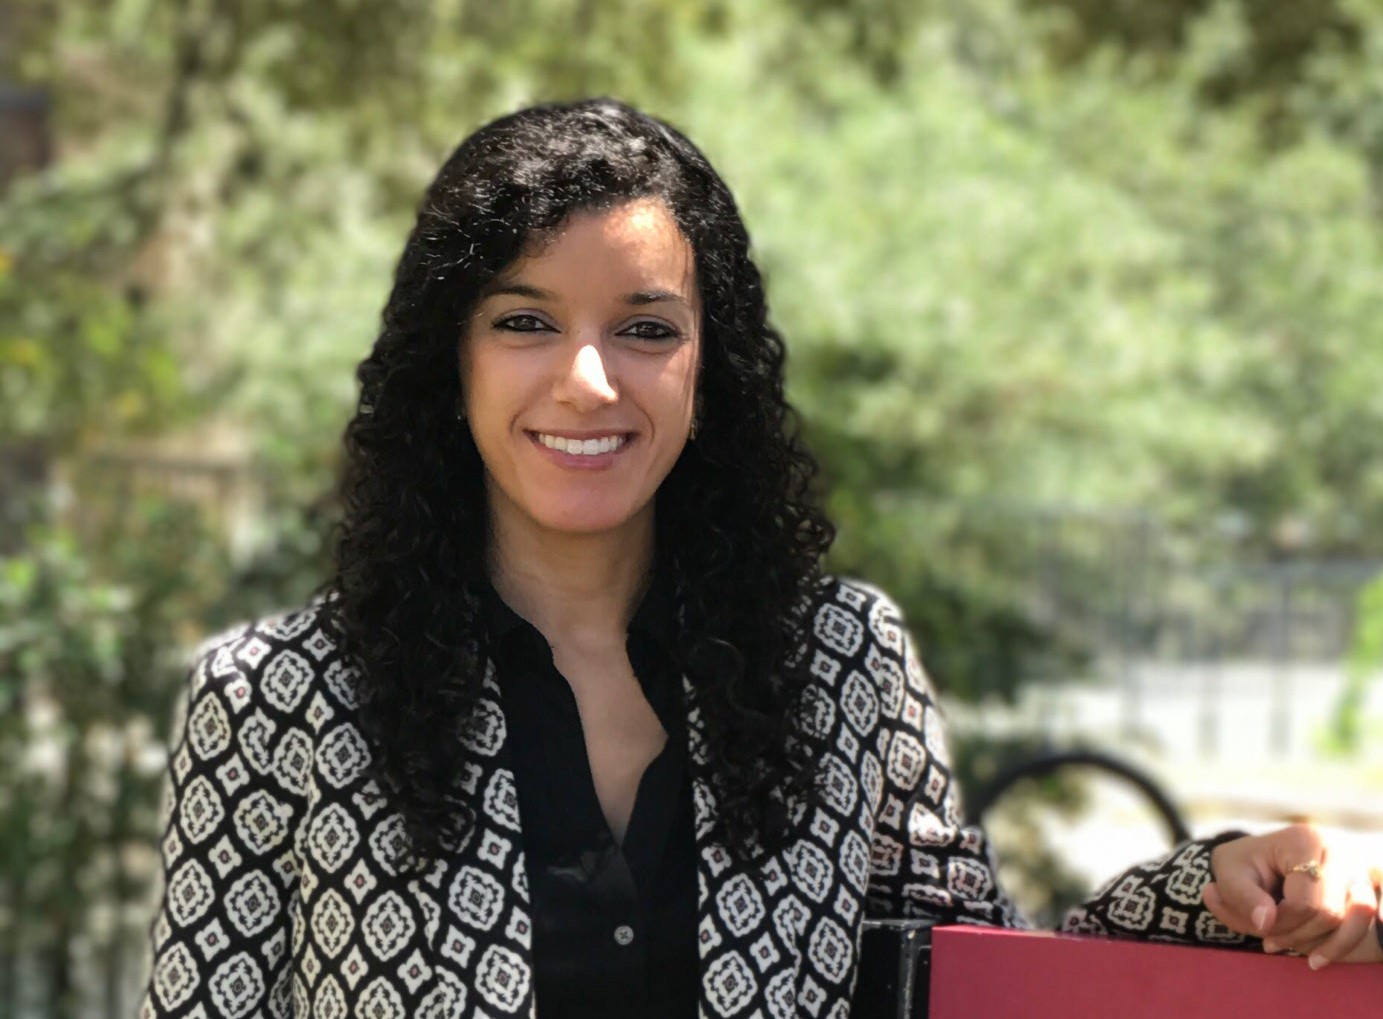 Dana El Kurd is an assistant professor at the Doha Institute for Graduate Studies and a researcher at the Arab Center for Research and Policy Studies.